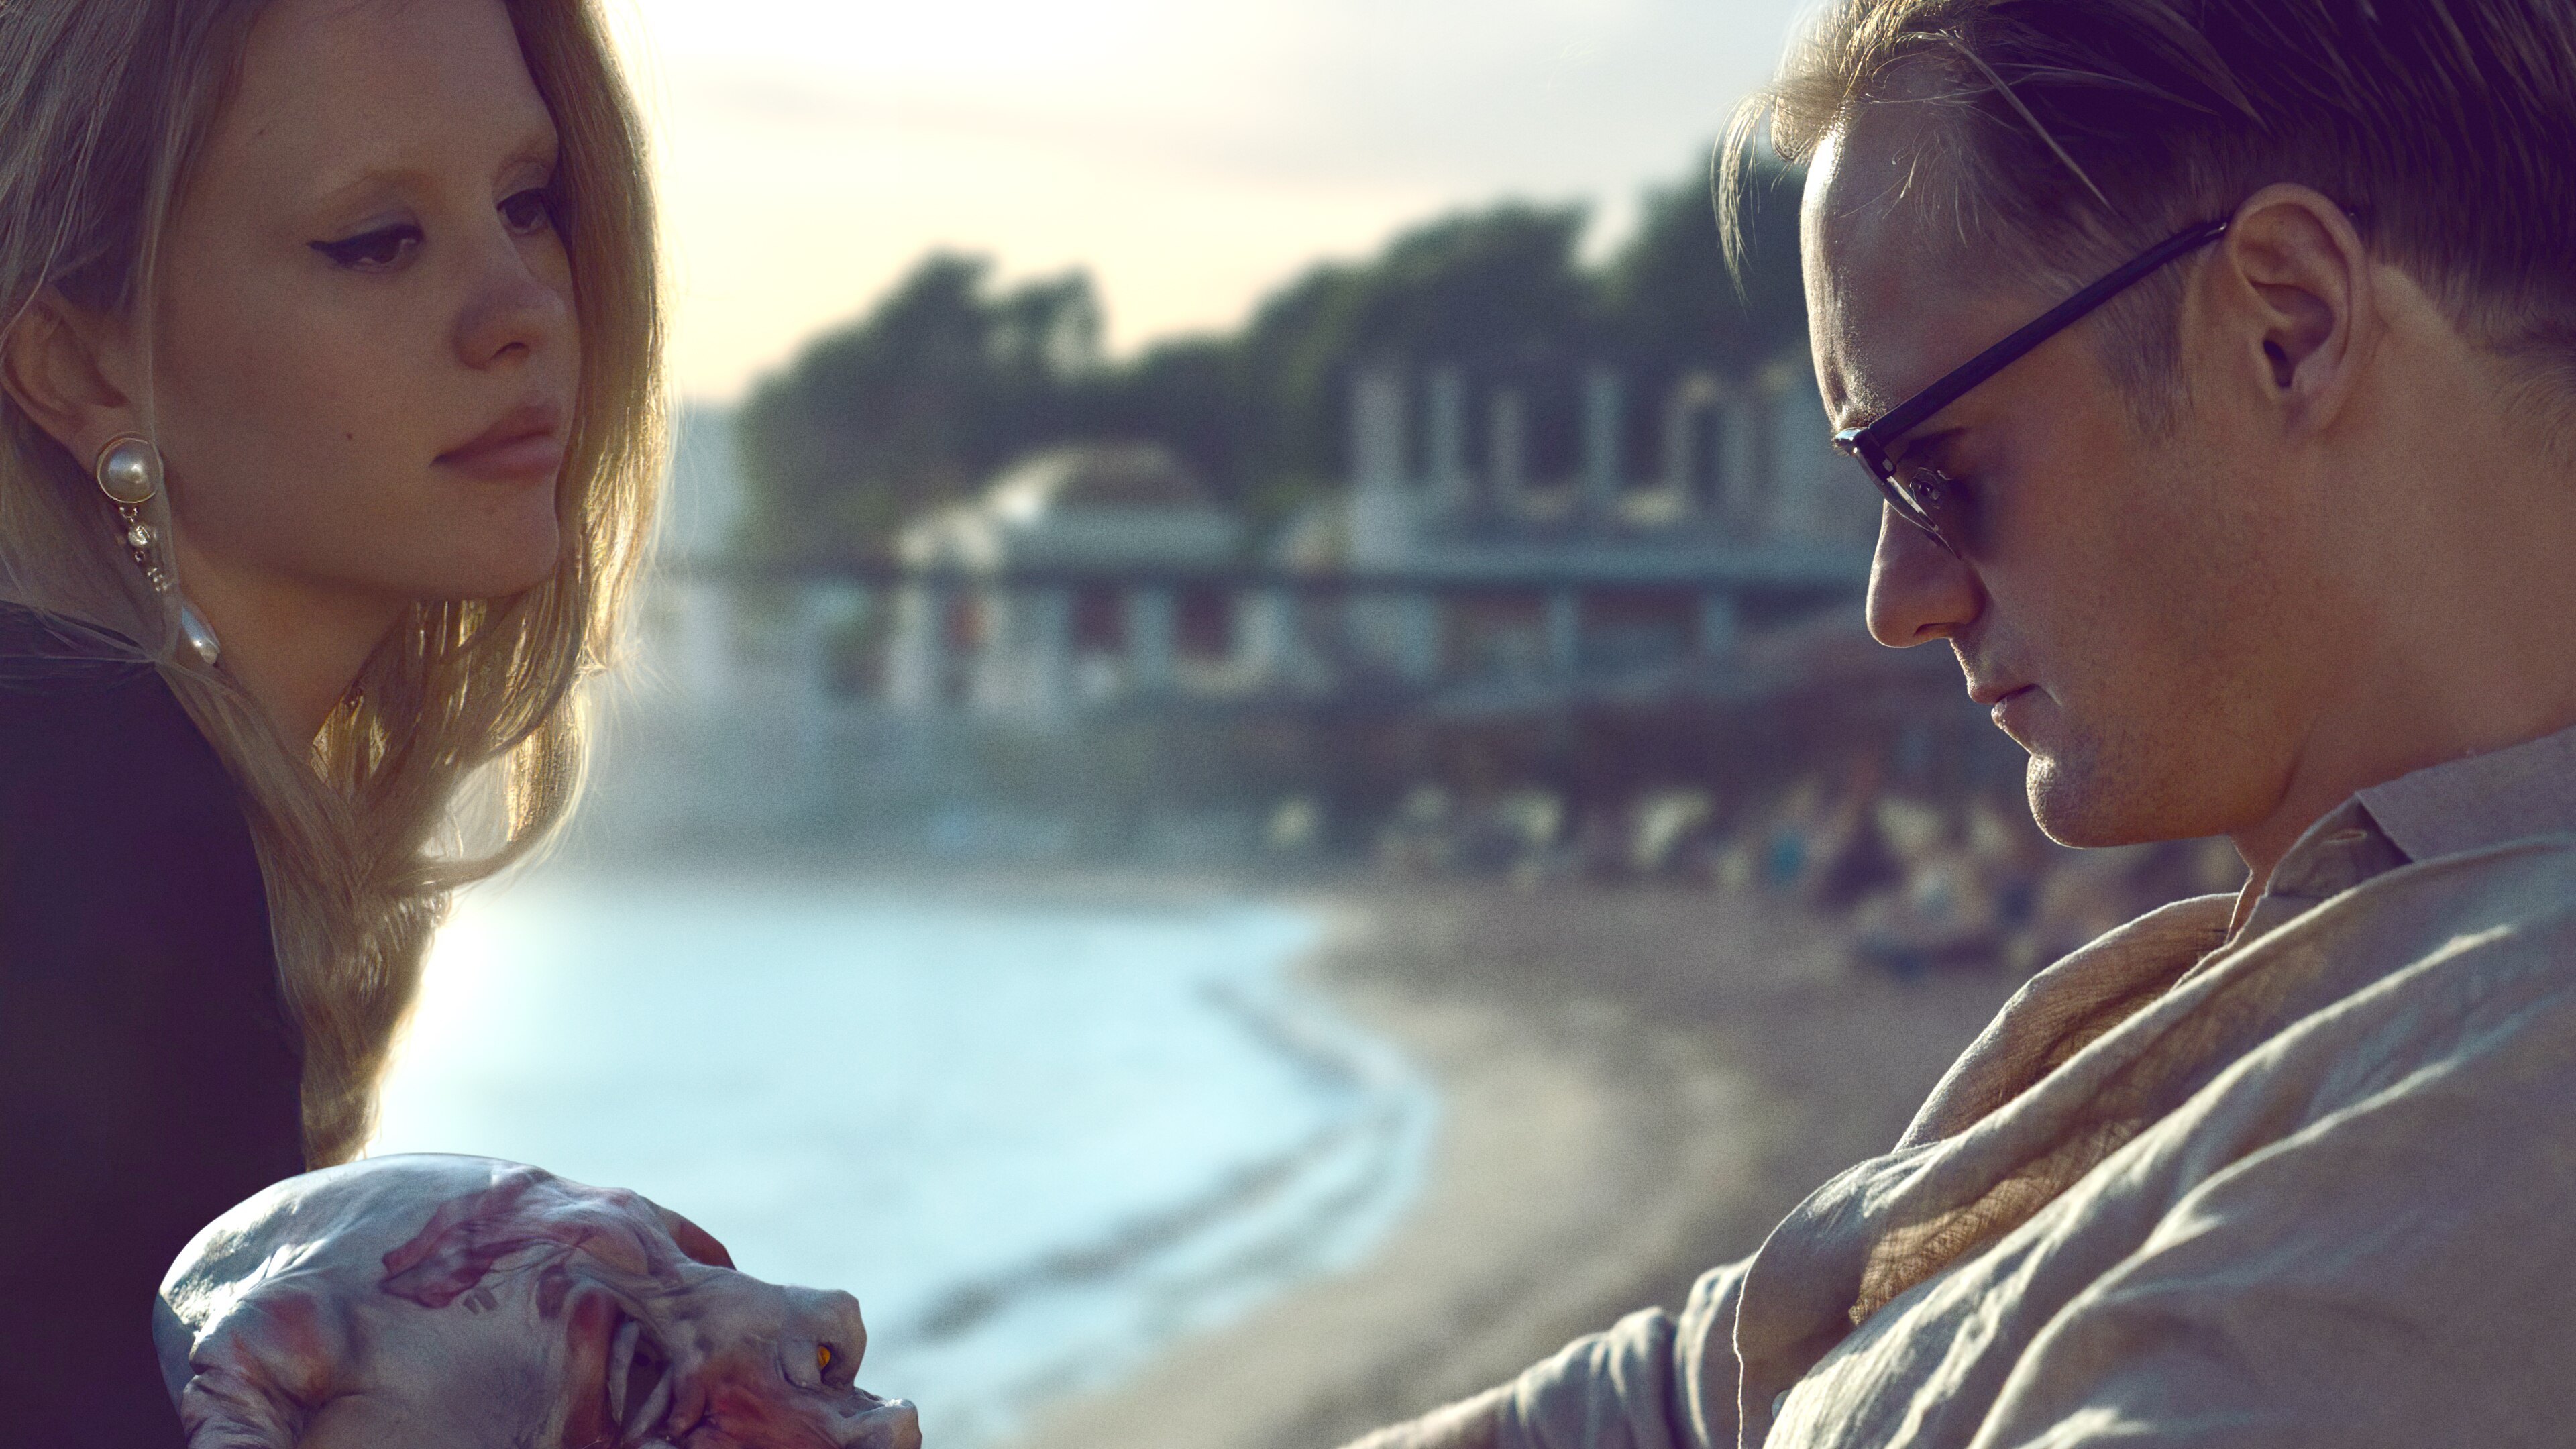 Mia Goth, a blonde white woman with brown eyes, sits on a beach with Alexander Skarsgård, a blonde white man in sunglasses.